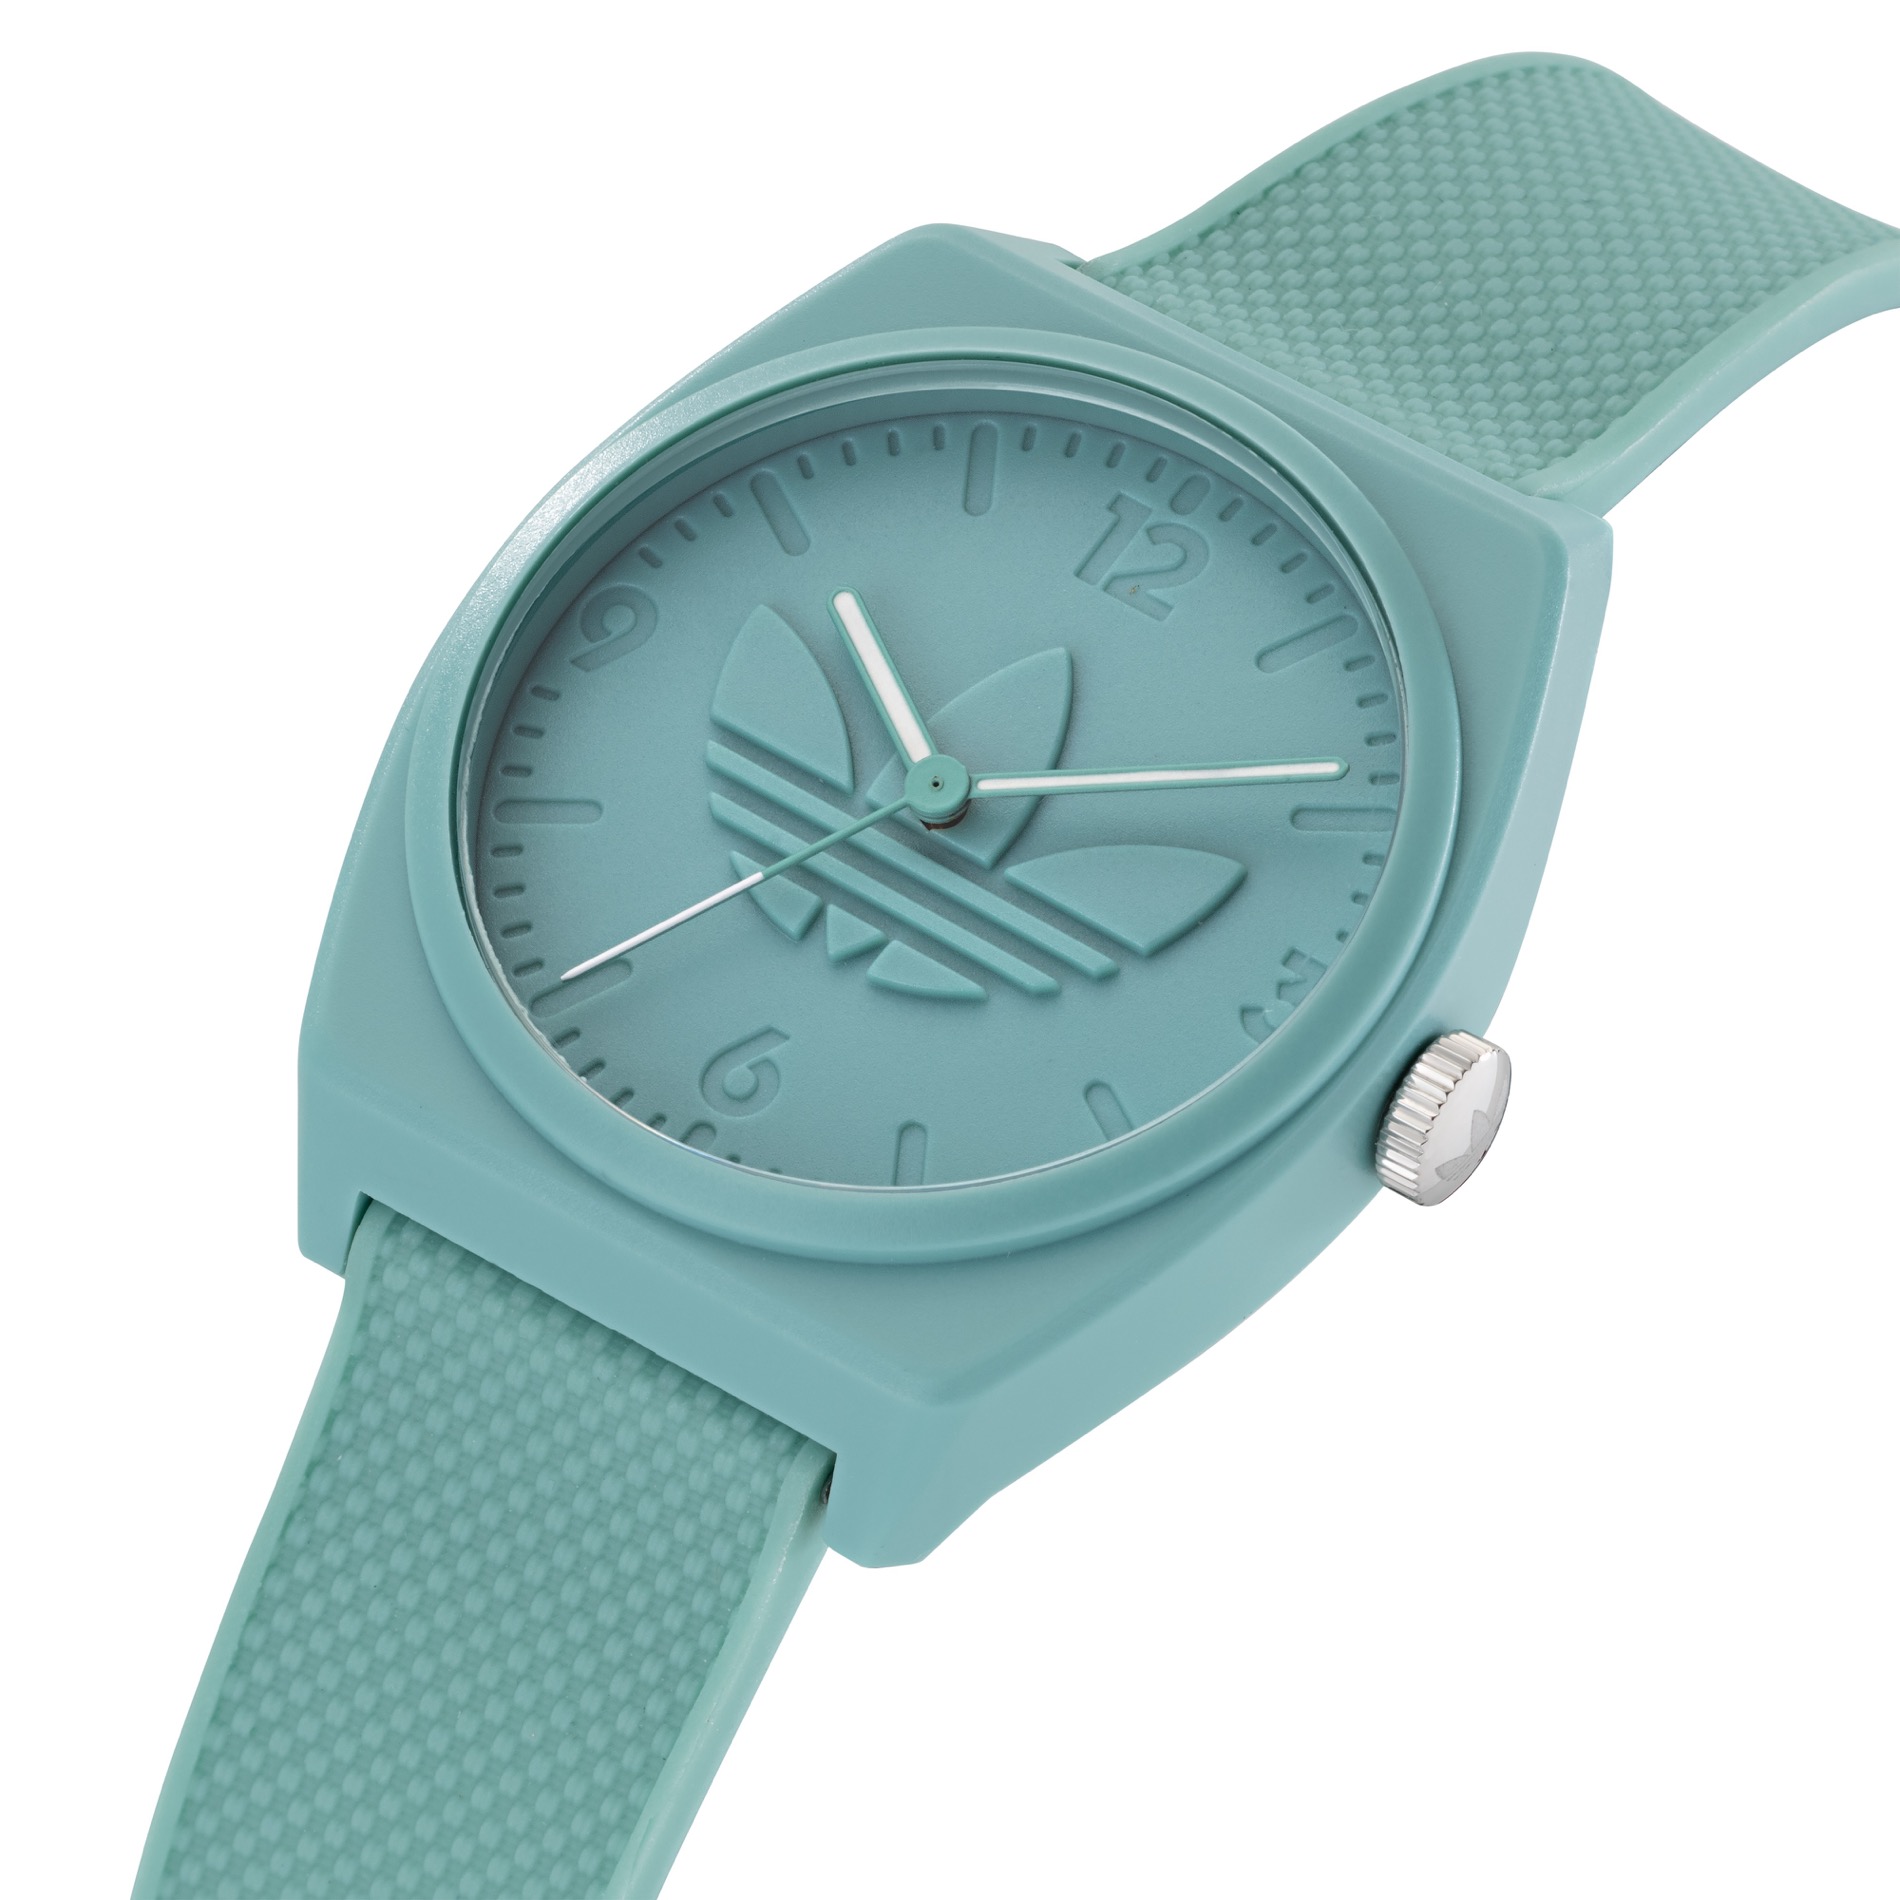 Introducing: Adidas Originals watches by Timex - WristWatchReview